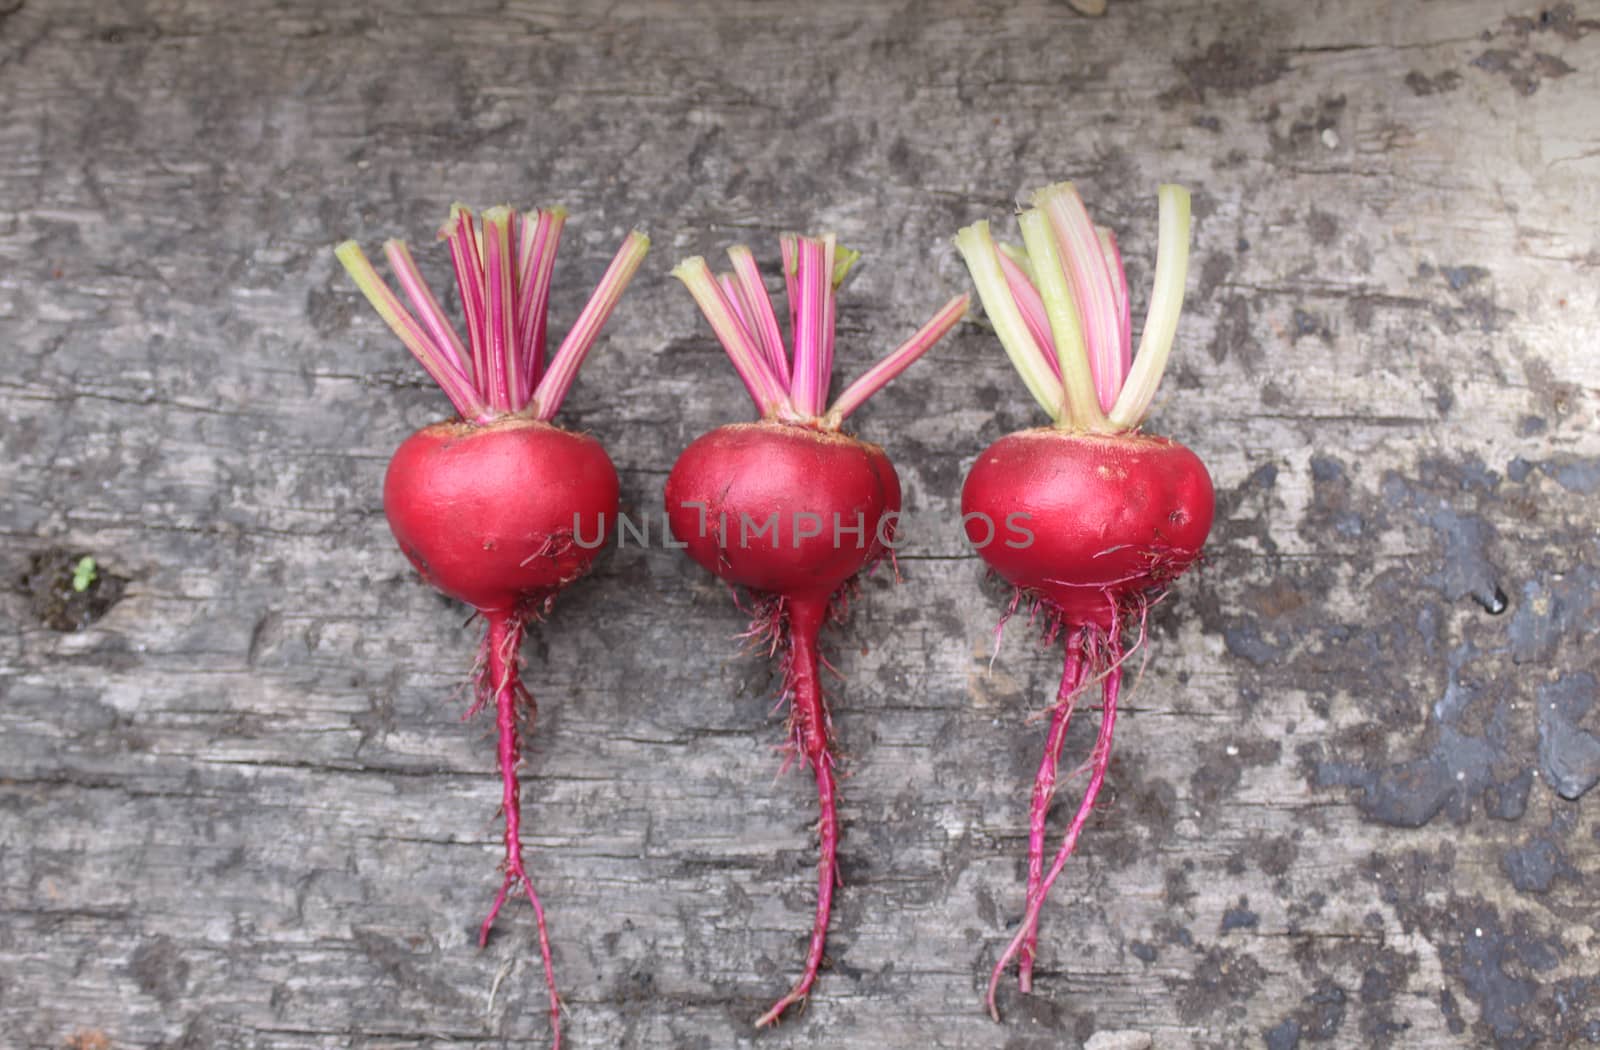 Three freshly picked beetroots, Chioggia, an Italian heirloom variety, with the remains of their tops attached. Set on a rustic wooden base on a landscape format.